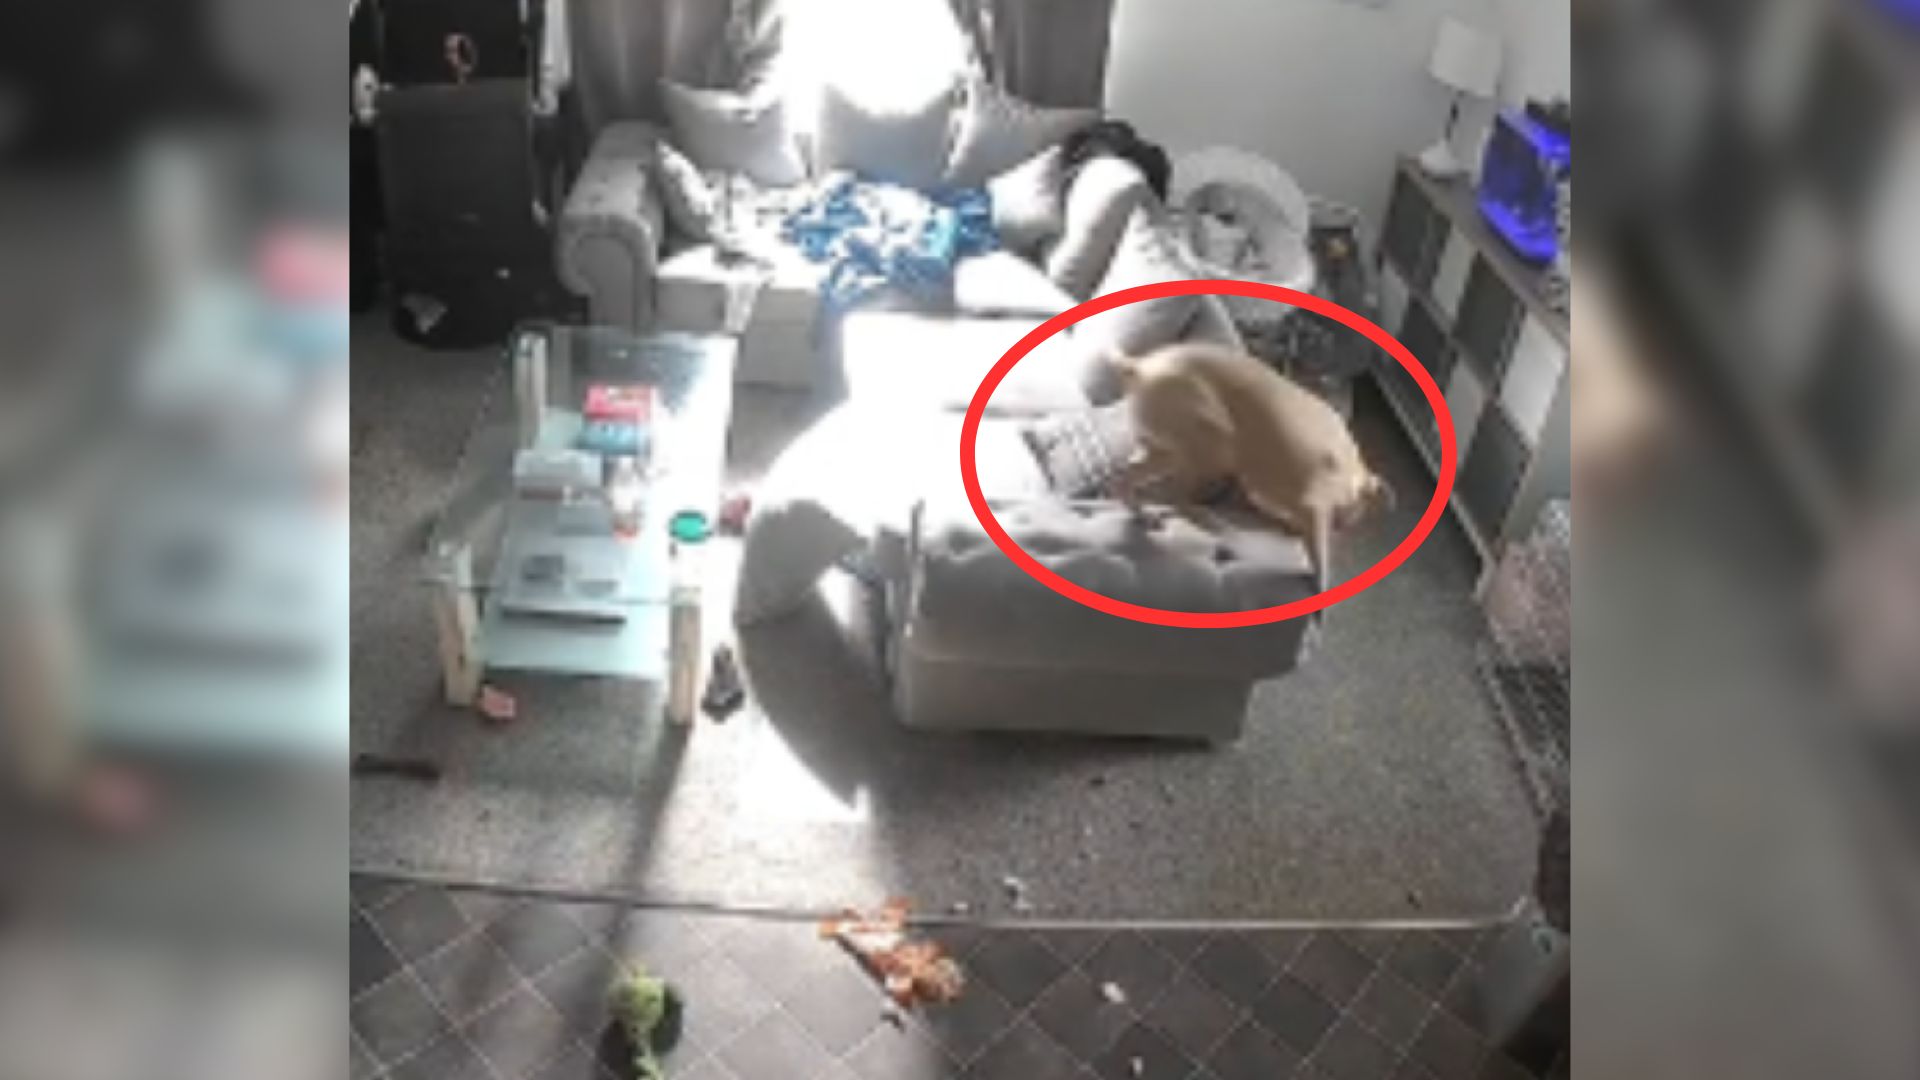 When She Looked At The Pet Camera, The Woman Was Shocked At The Chaos Her Puppy Had Caused